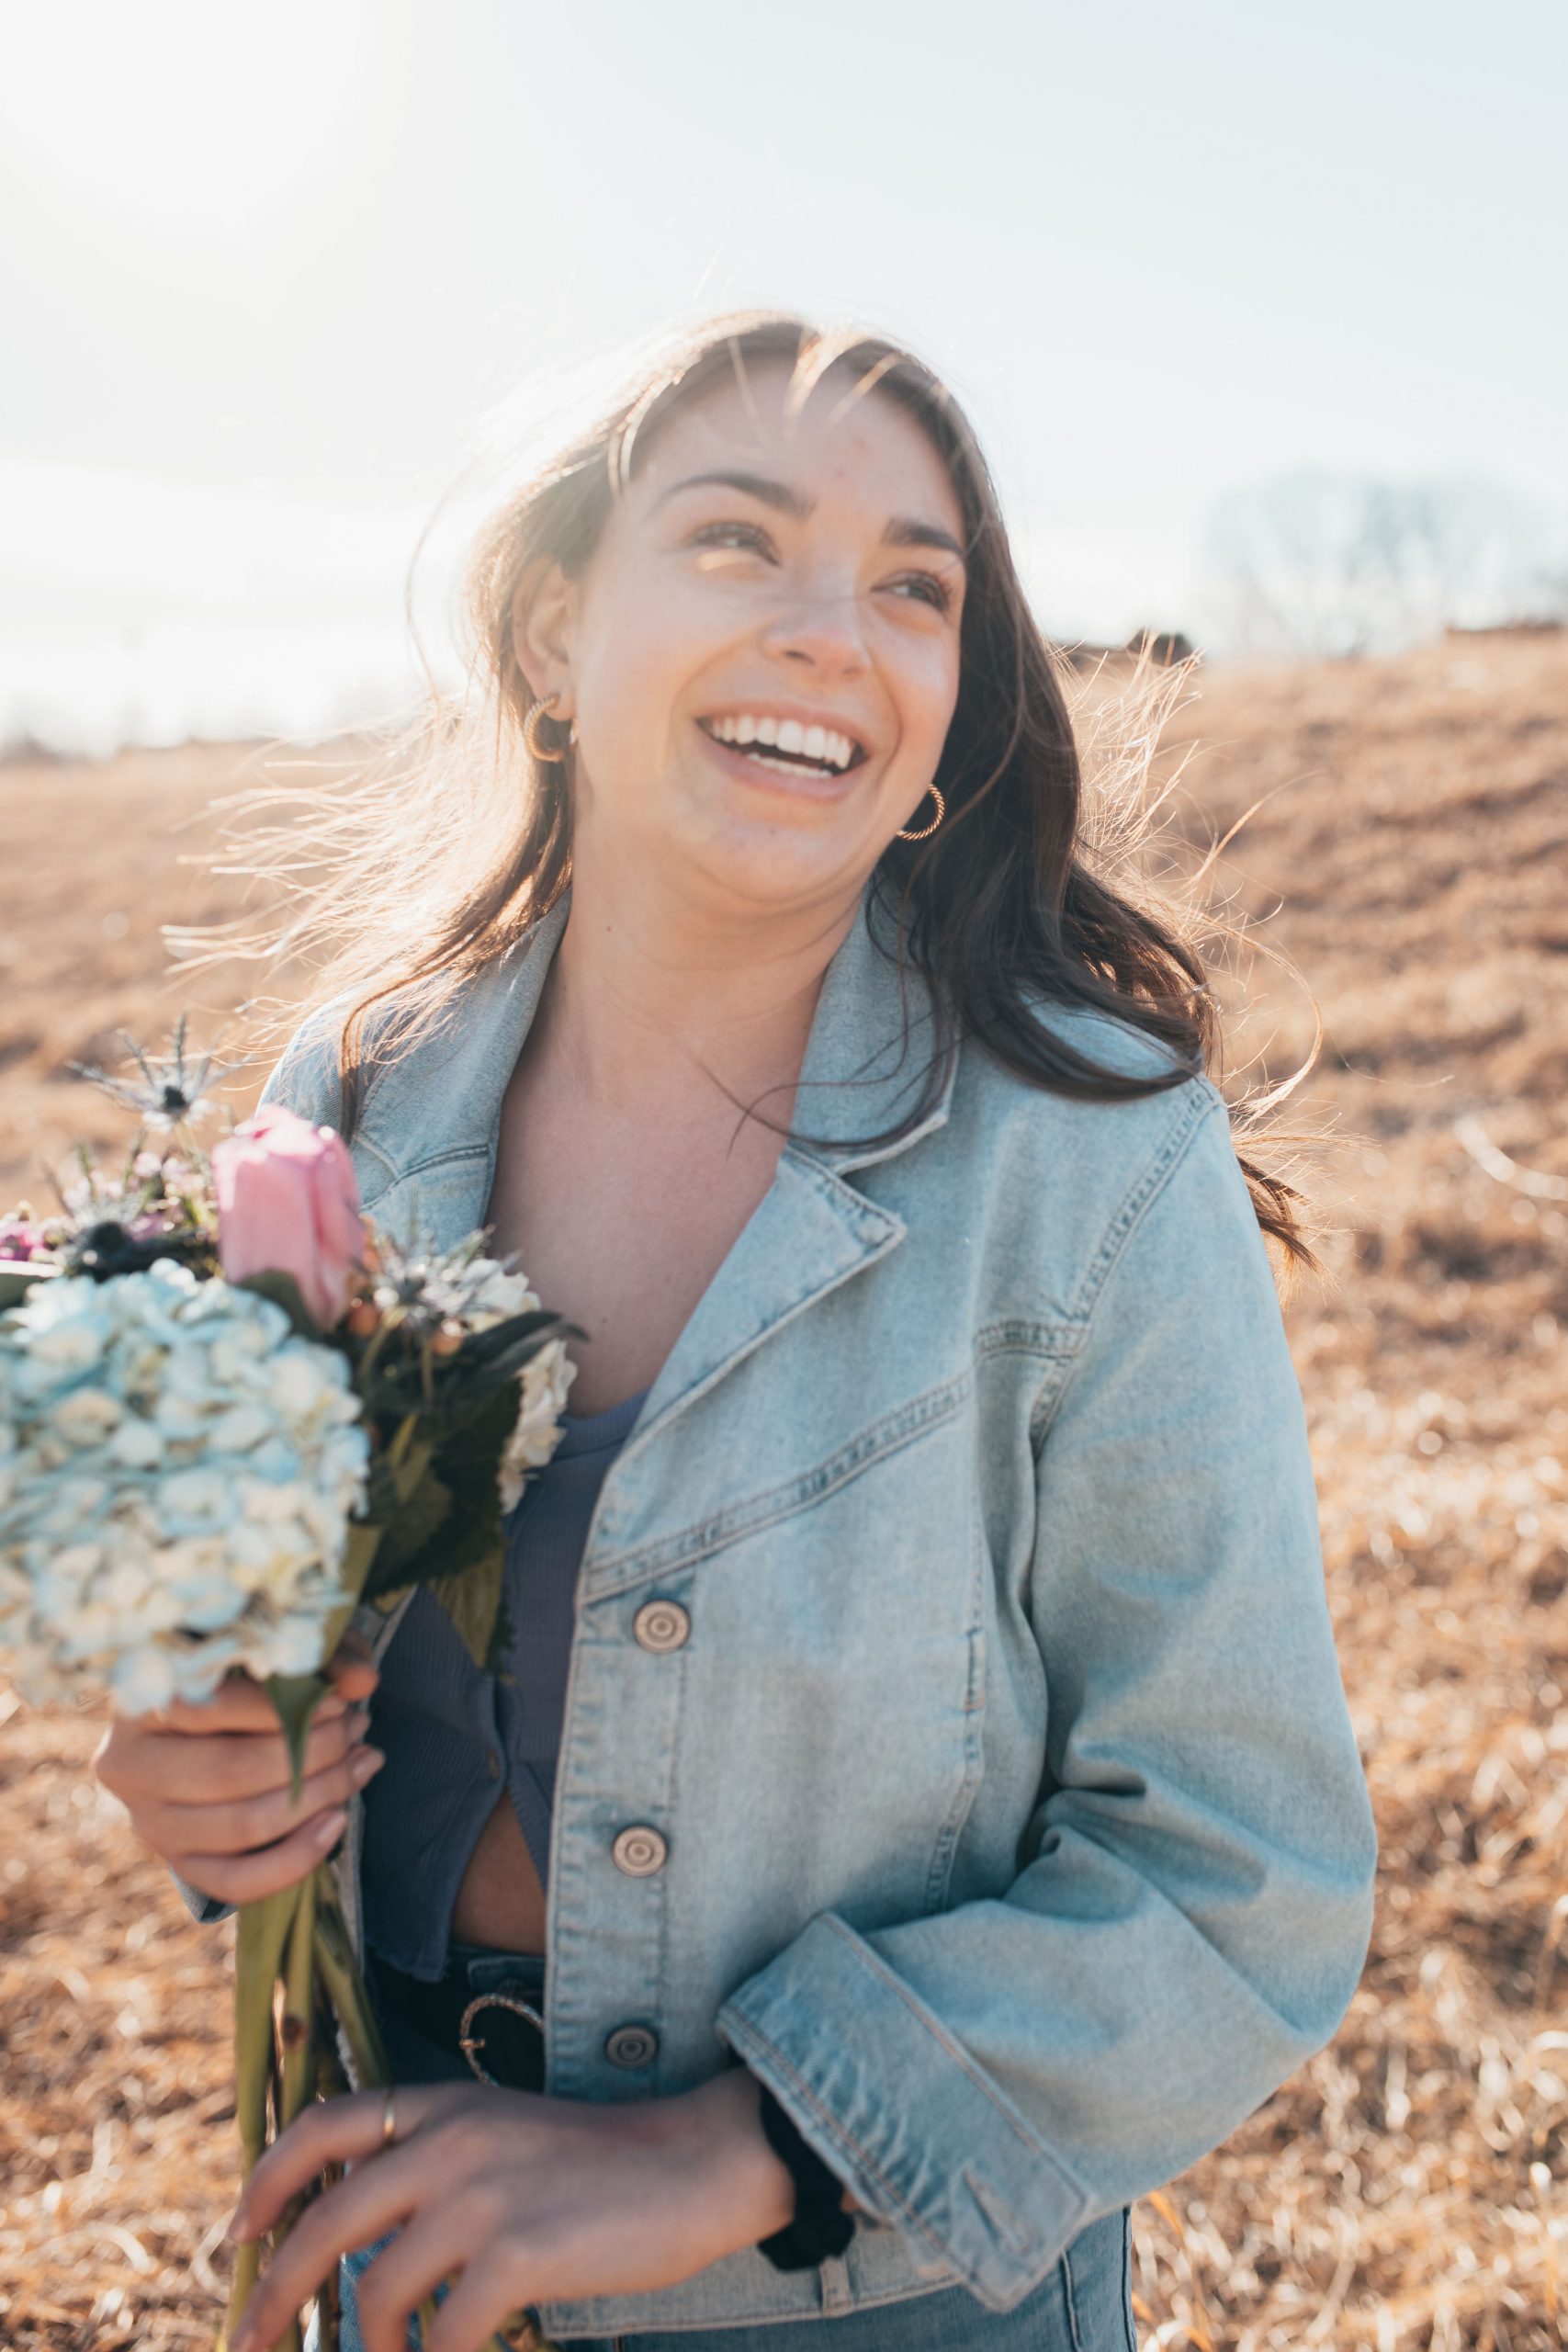 Angela LaRose- Open field, brown haired woman holds a bouquet of flowers while smiling